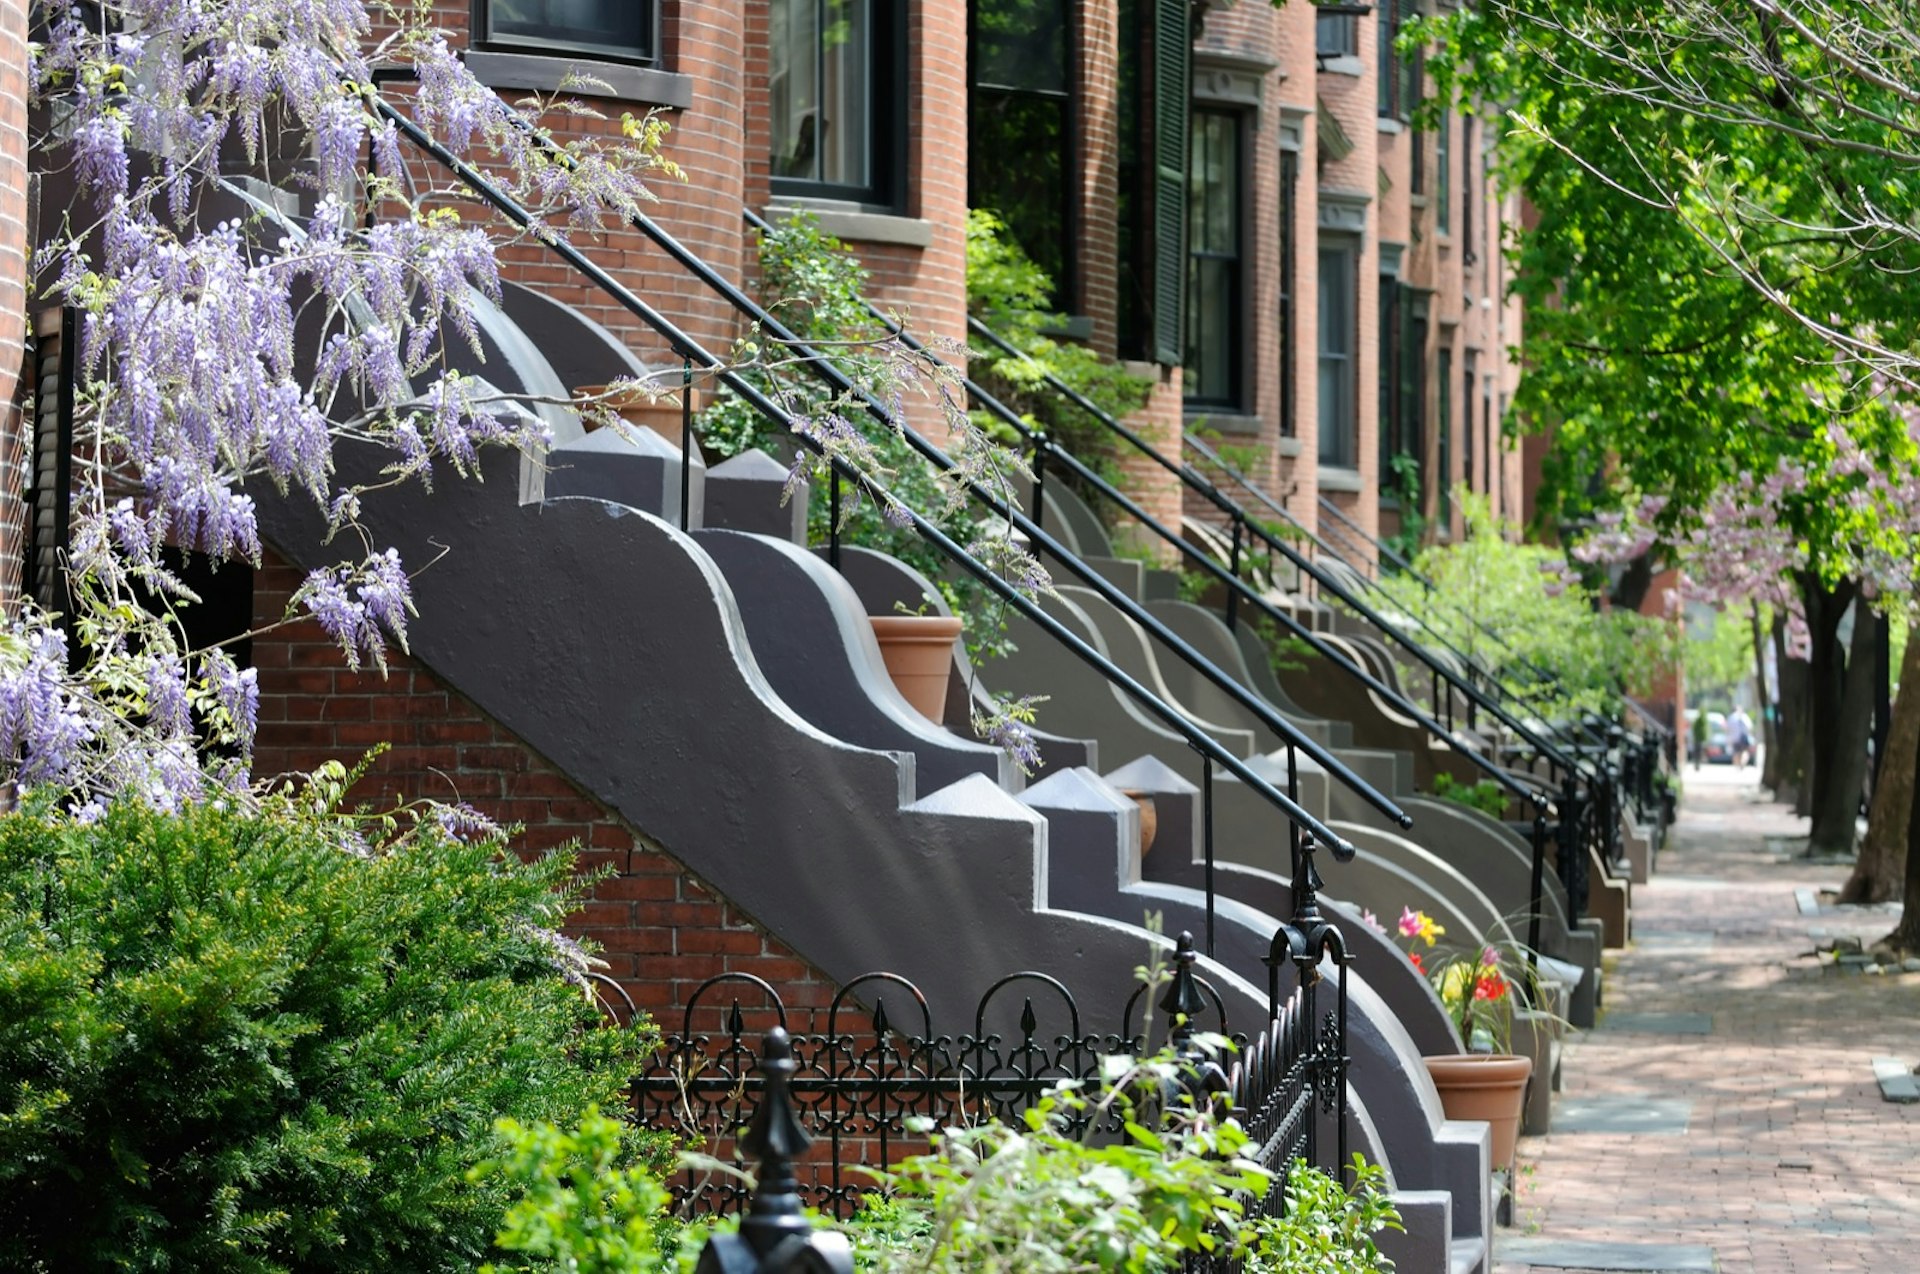 A row of classic Victorian-themed apartments with red brick walls and sidewalks, elegant stone steps and iron railings. There is a light purple plant next to stairs and a row of trees lining the sidewalks; Perfect weekend Boston.